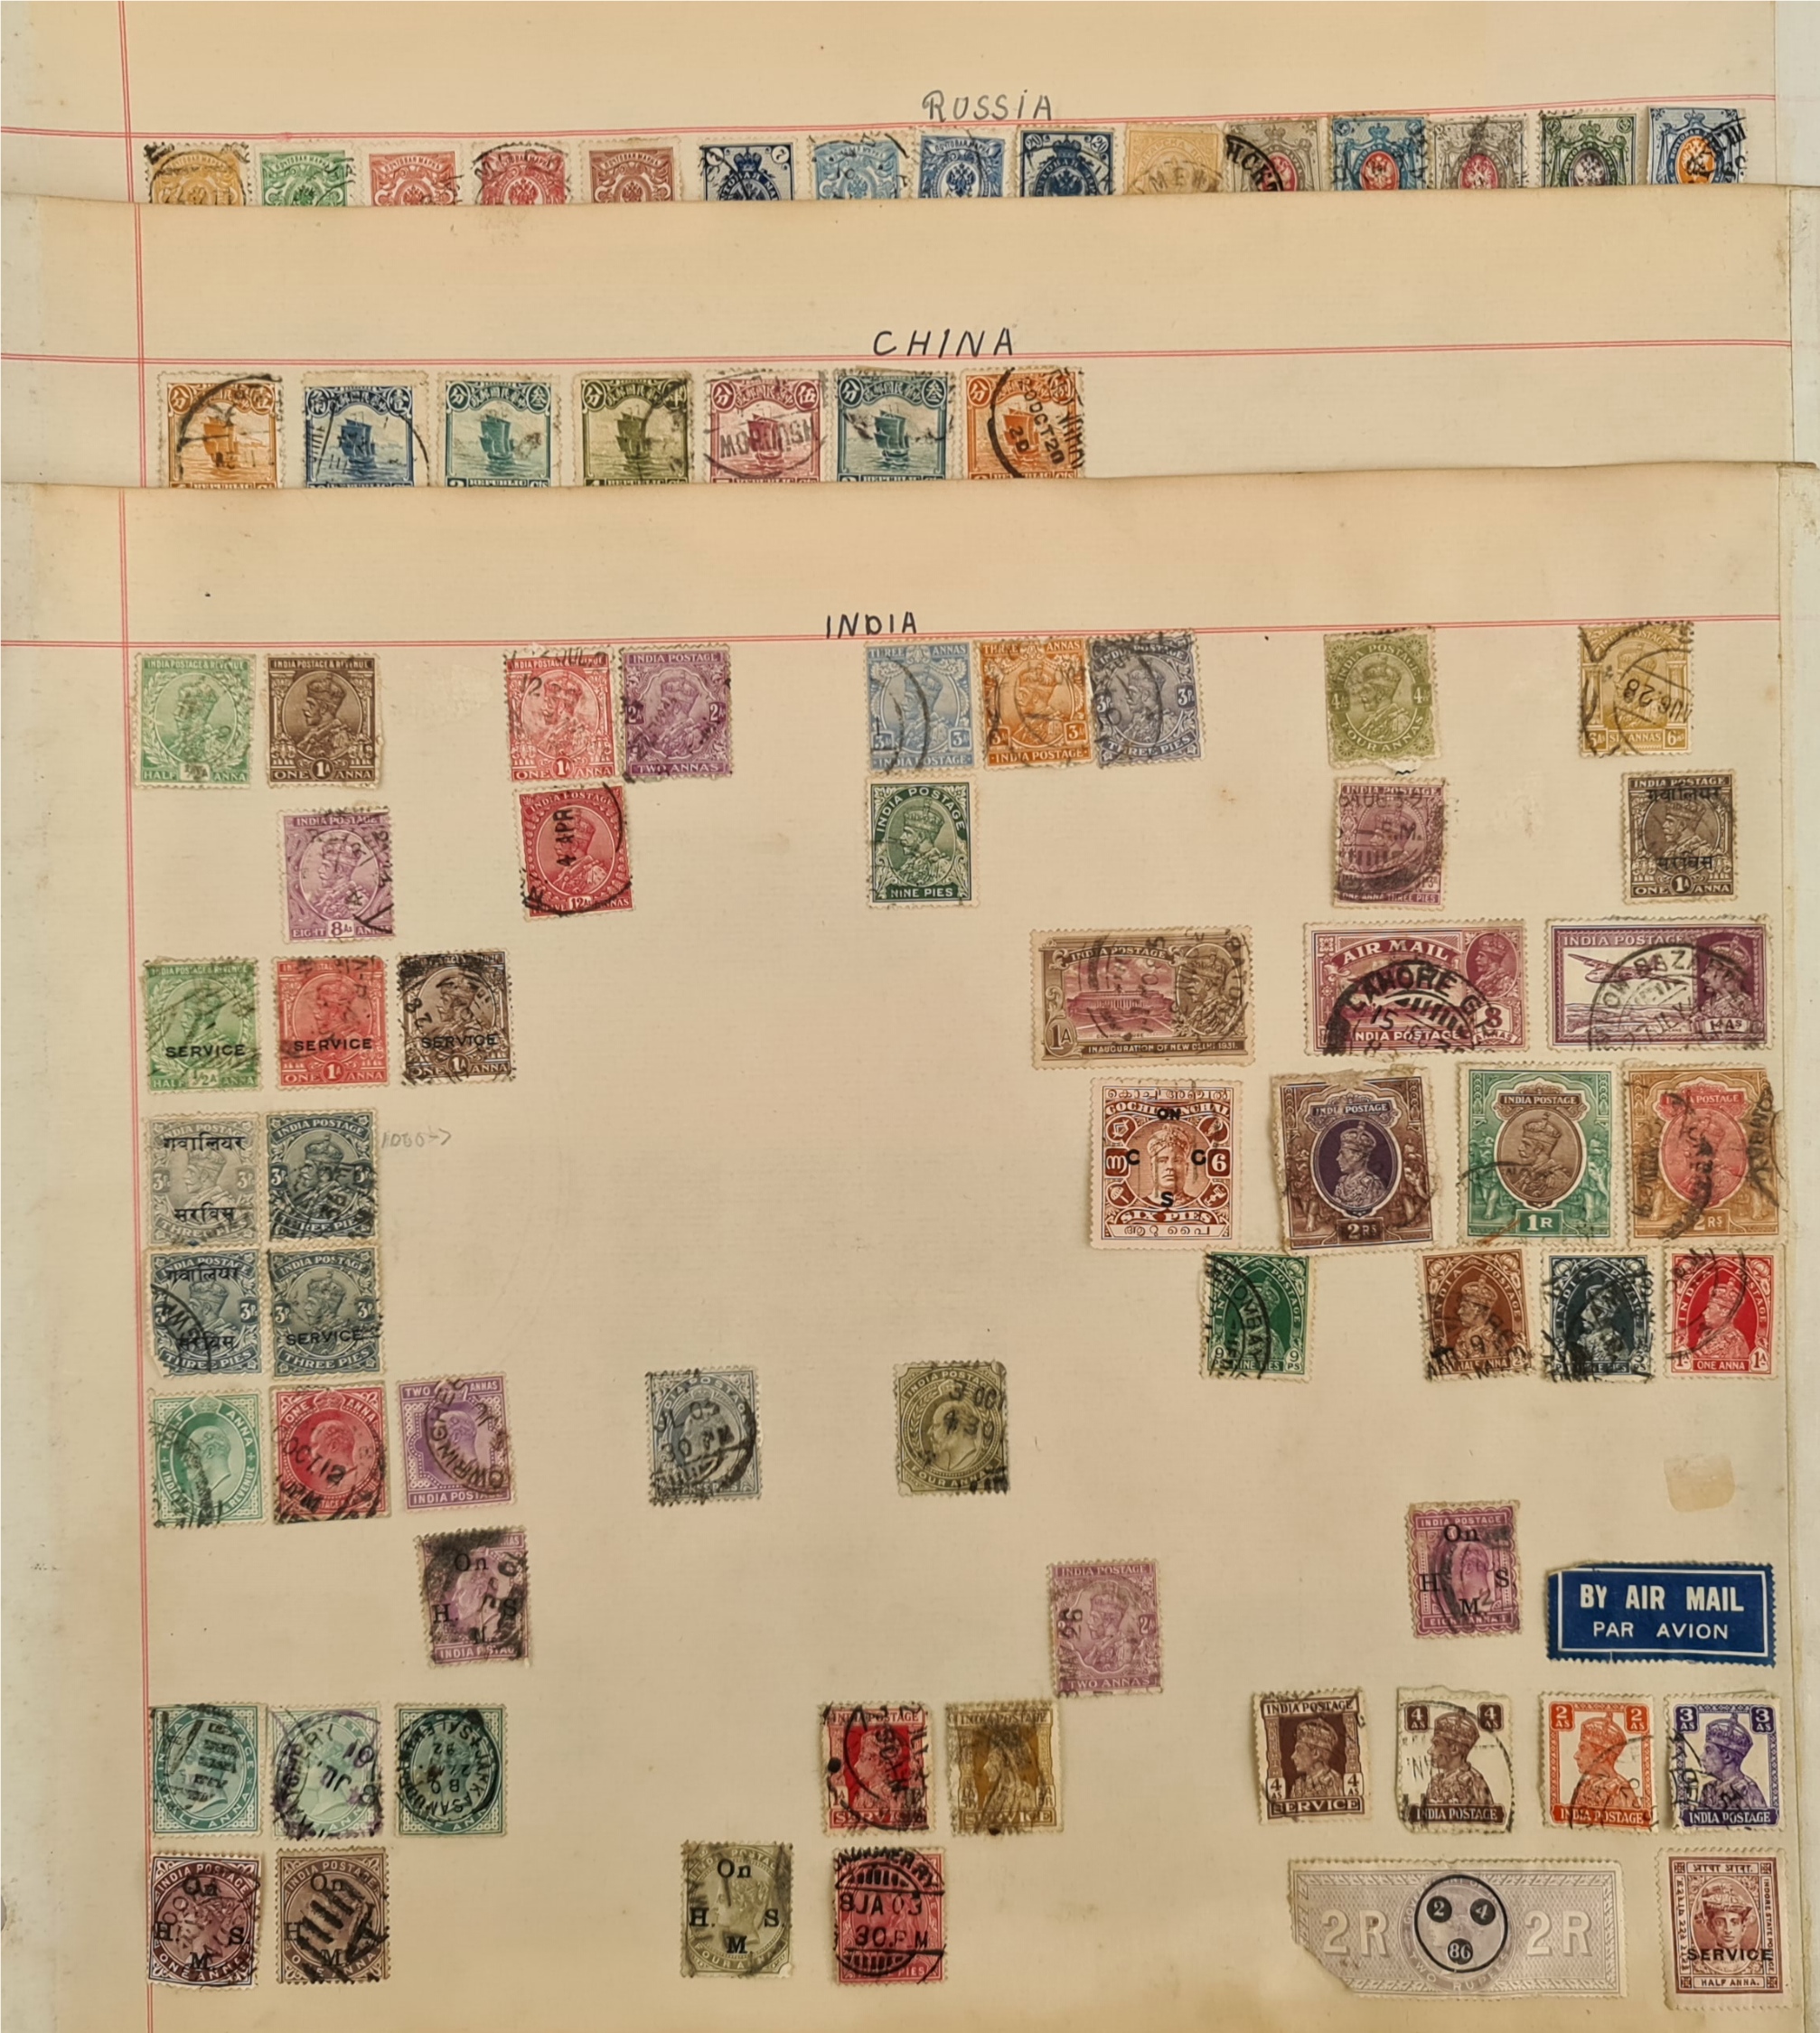 Antique Parcel of 120 Russia China & India Postage Stamps